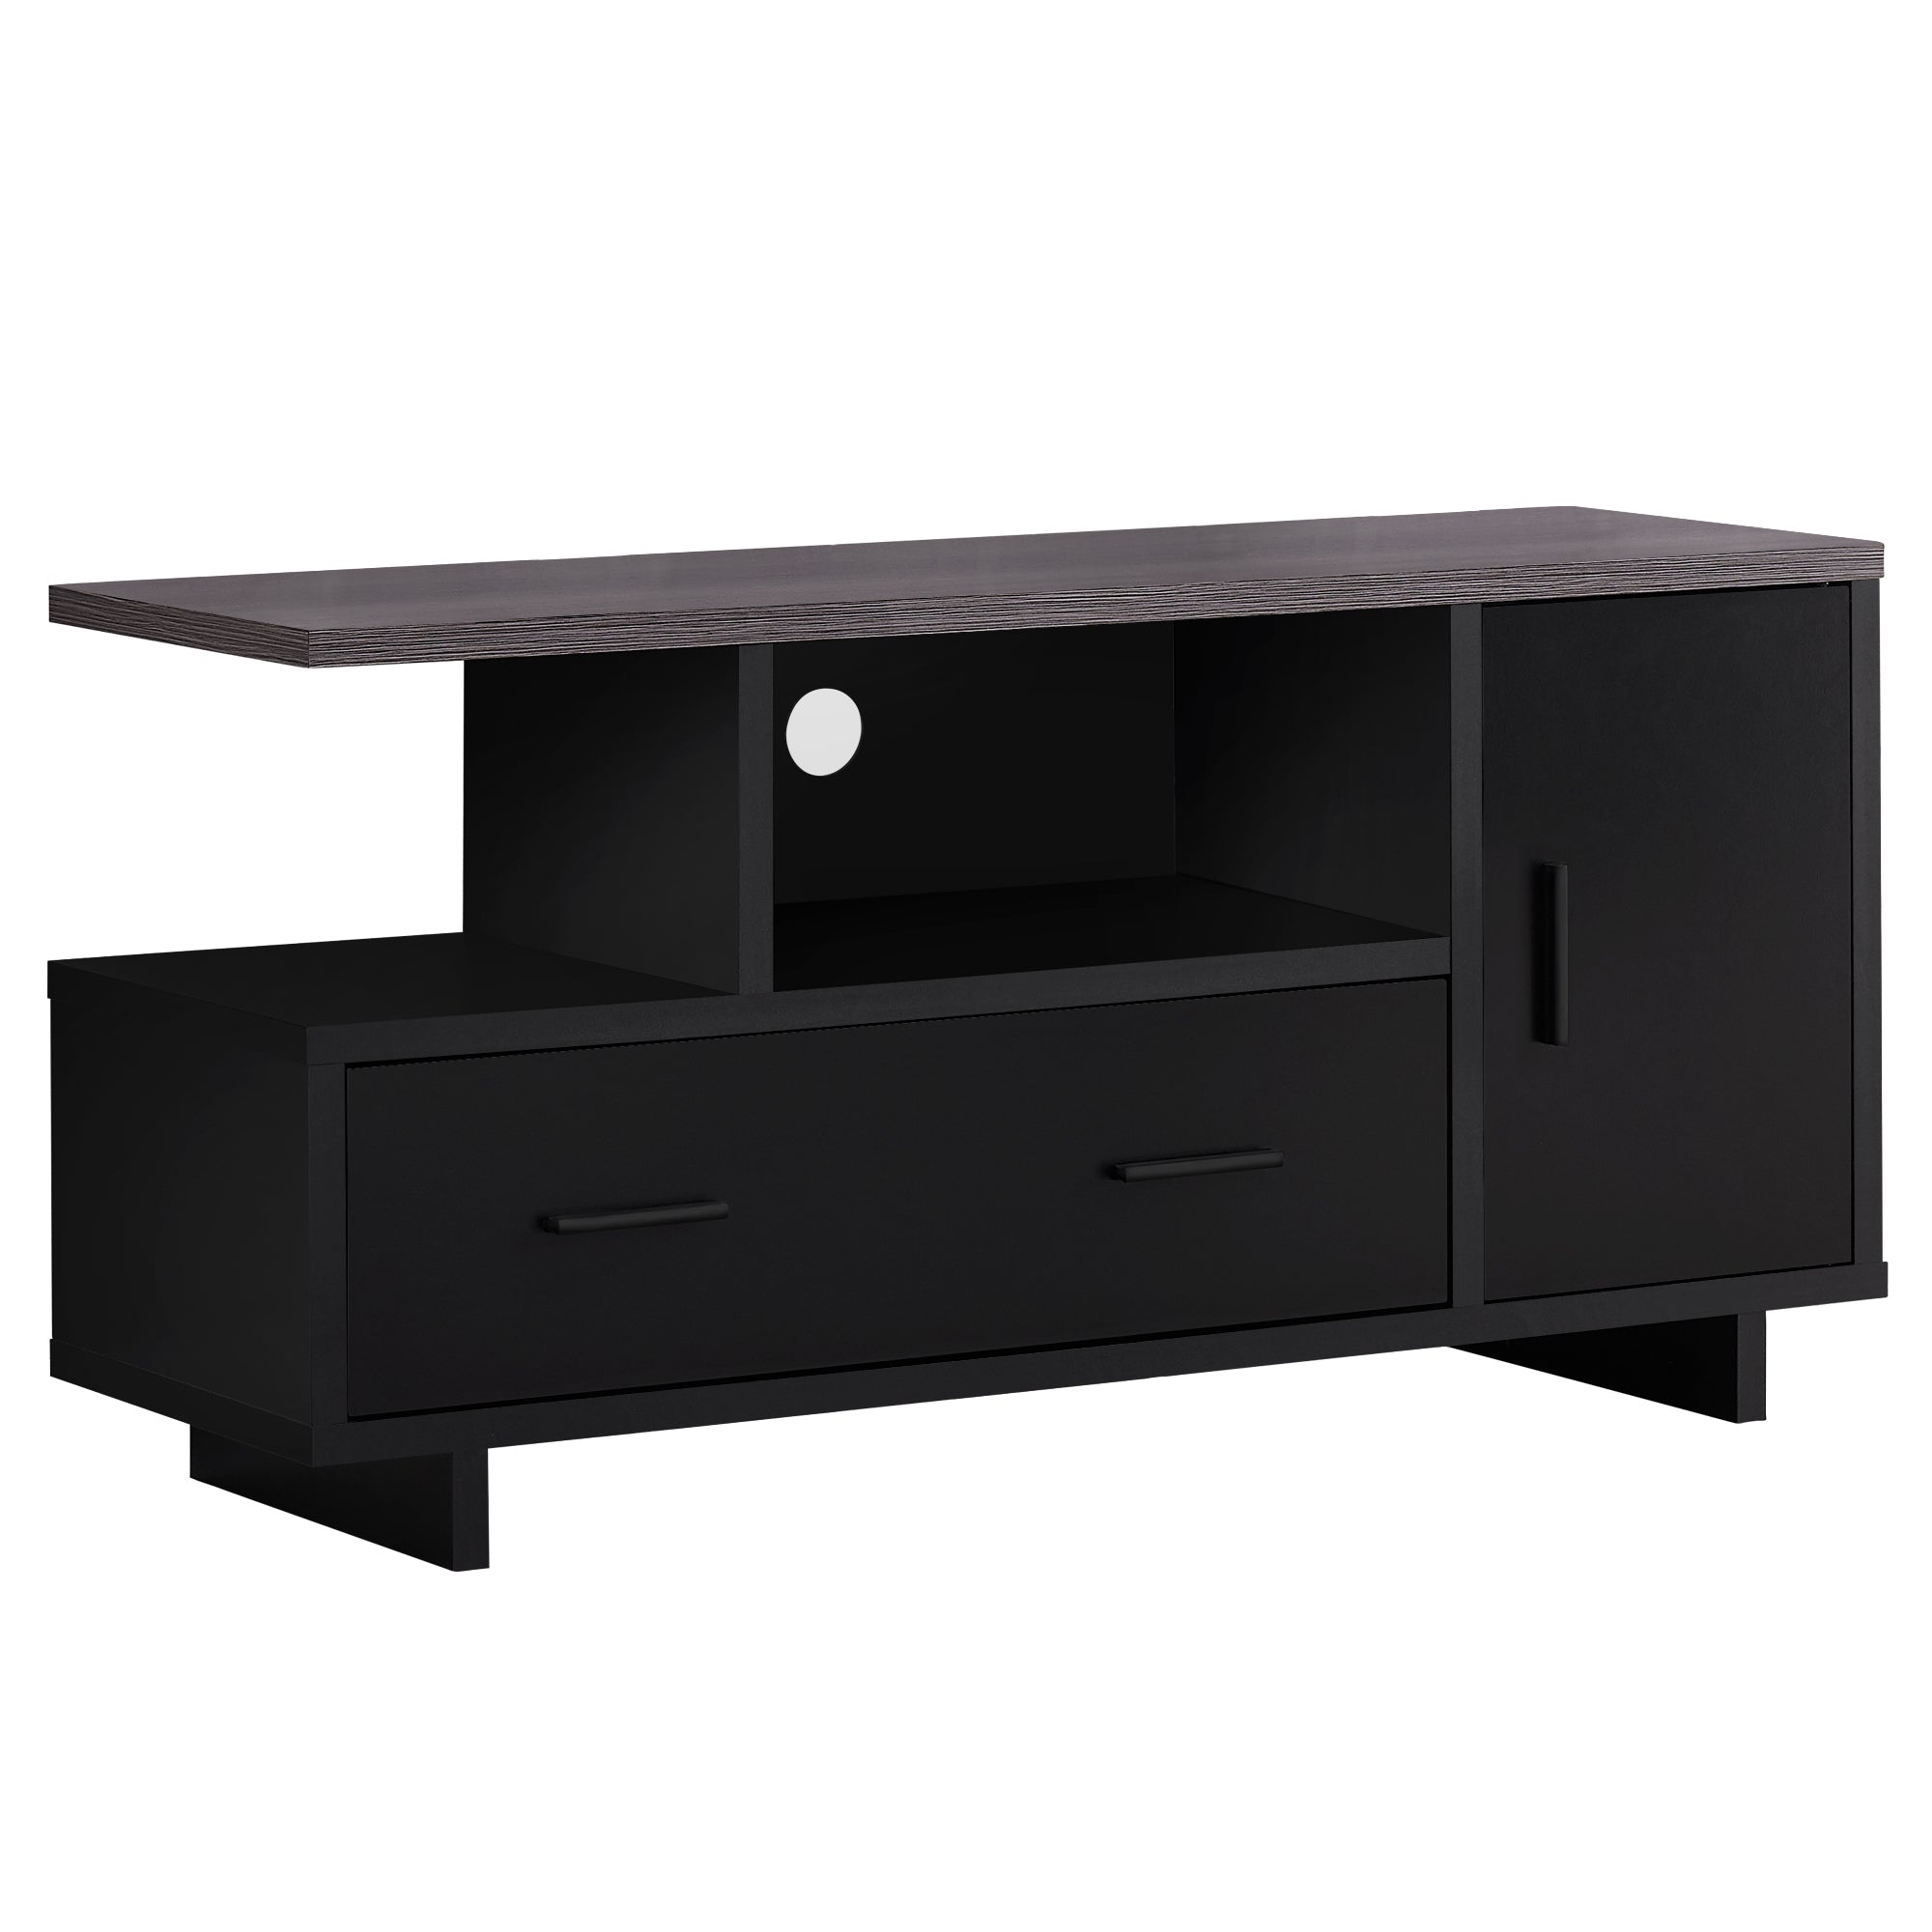 MN-352801    Tv Stand, 48 Inch, Console, Media Entertainment Center, Storage Cabinet, Living Room, Bedroom, Laminate, Black, Grey, Contemporary, Modern